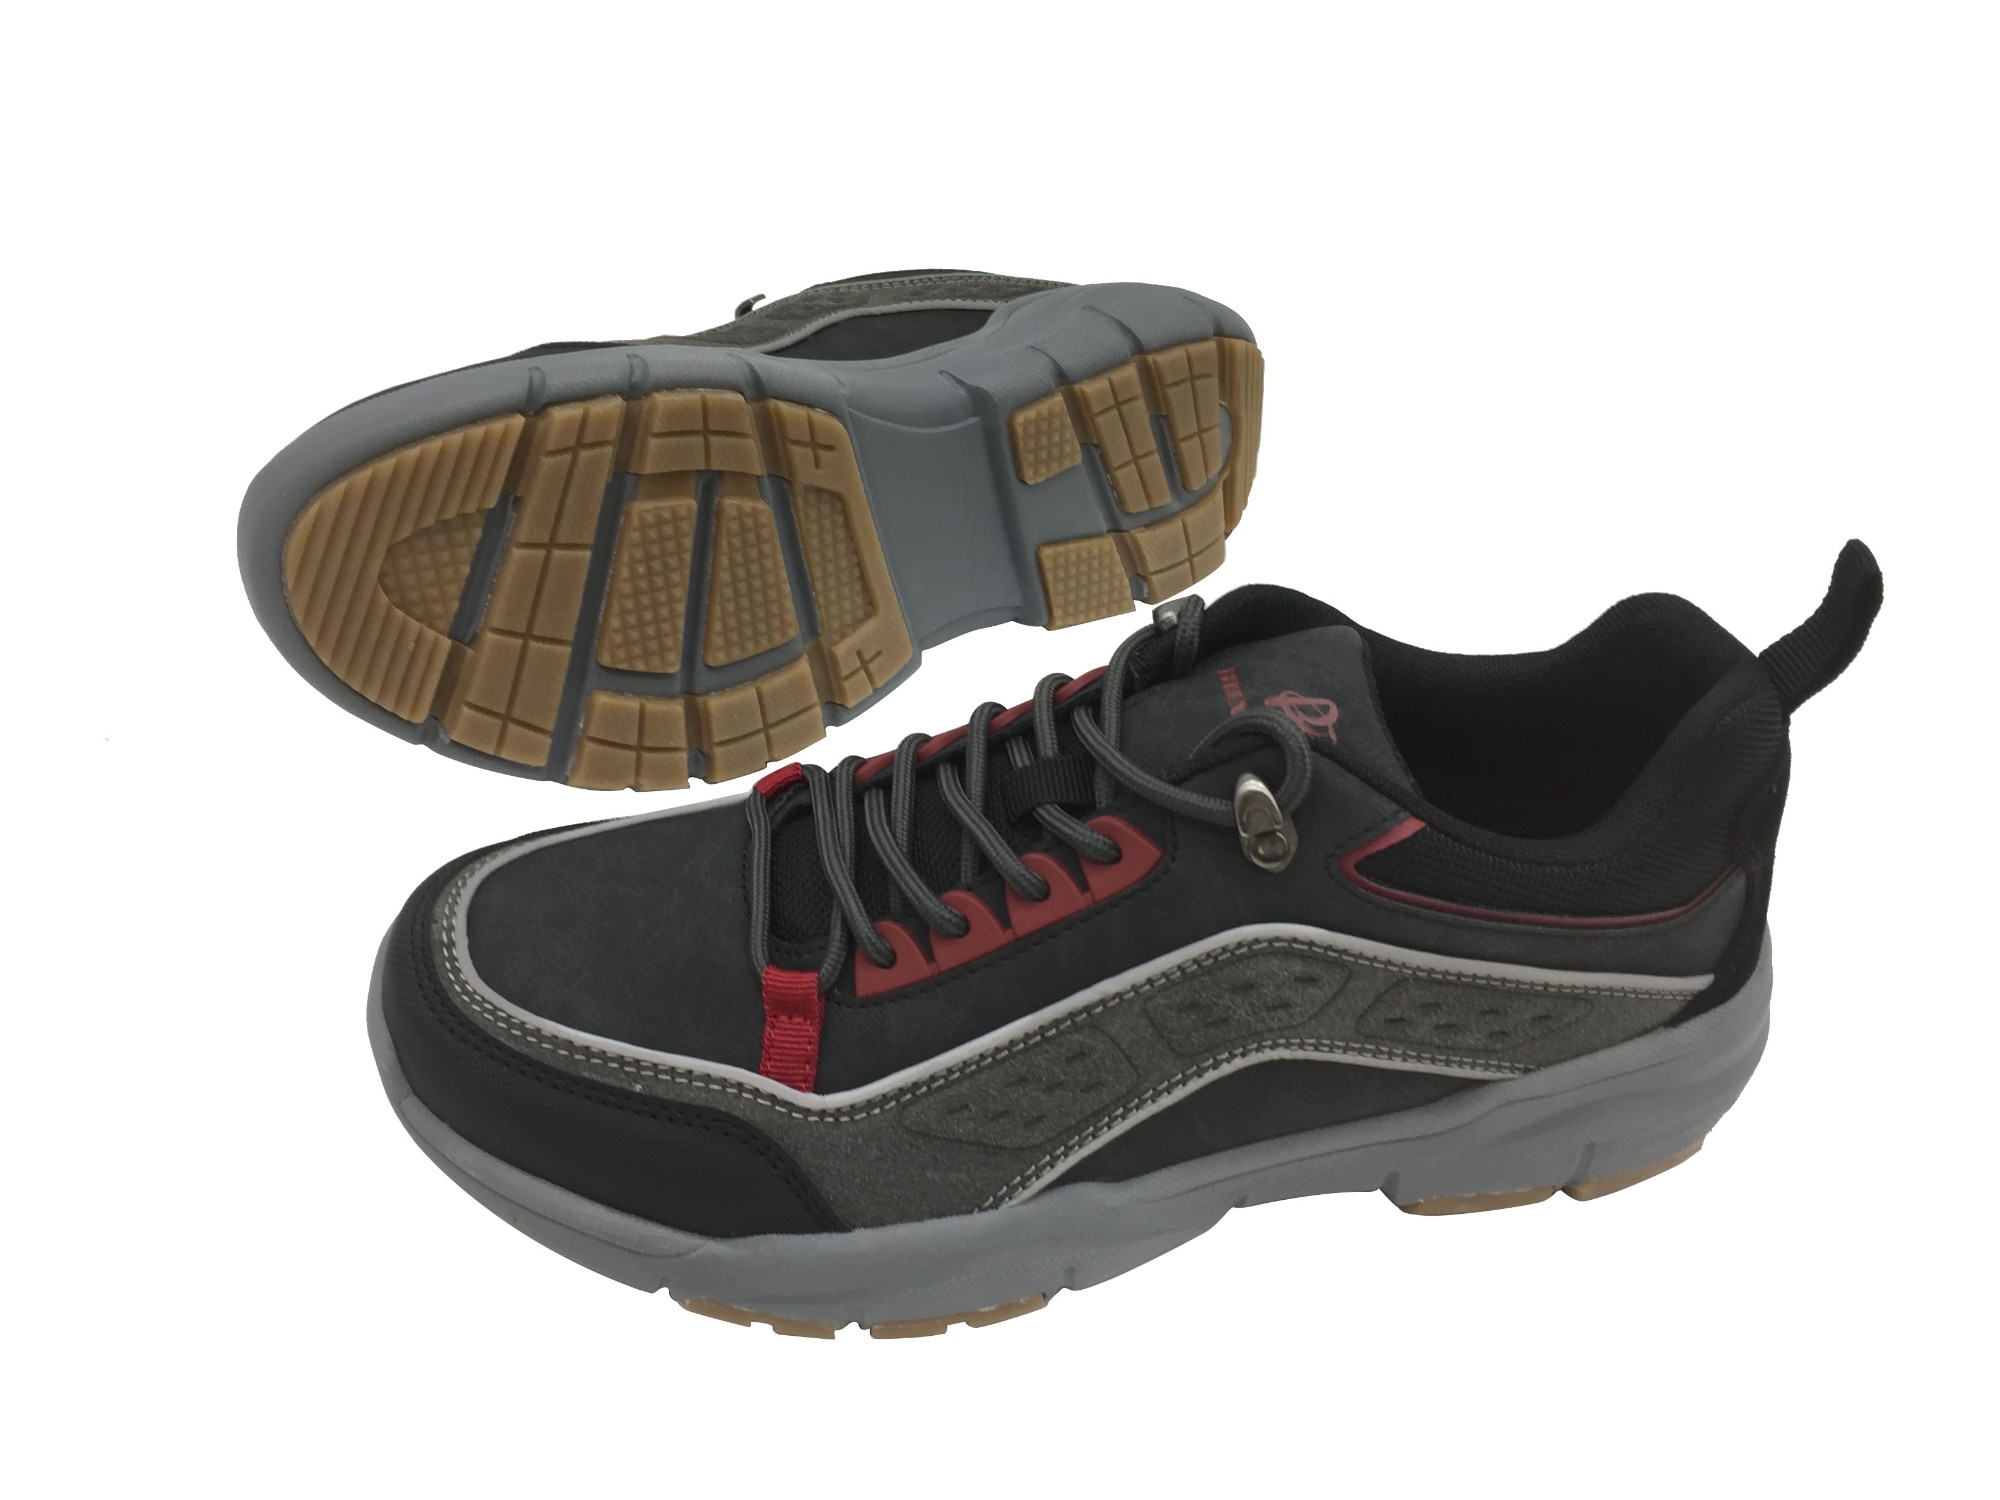 Newest PU men's shoes outdoor shoes antiskid and wear-resistant walking shoes for autumn and winter Manufacturers, Newest PU men's shoes outdoor shoes antiskid and wear-resistant walking shoes for autumn and winter Factory, Supply Newest PU men's shoes outdoor shoes antiskid and wear-resistant walking shoes for autumn and winter